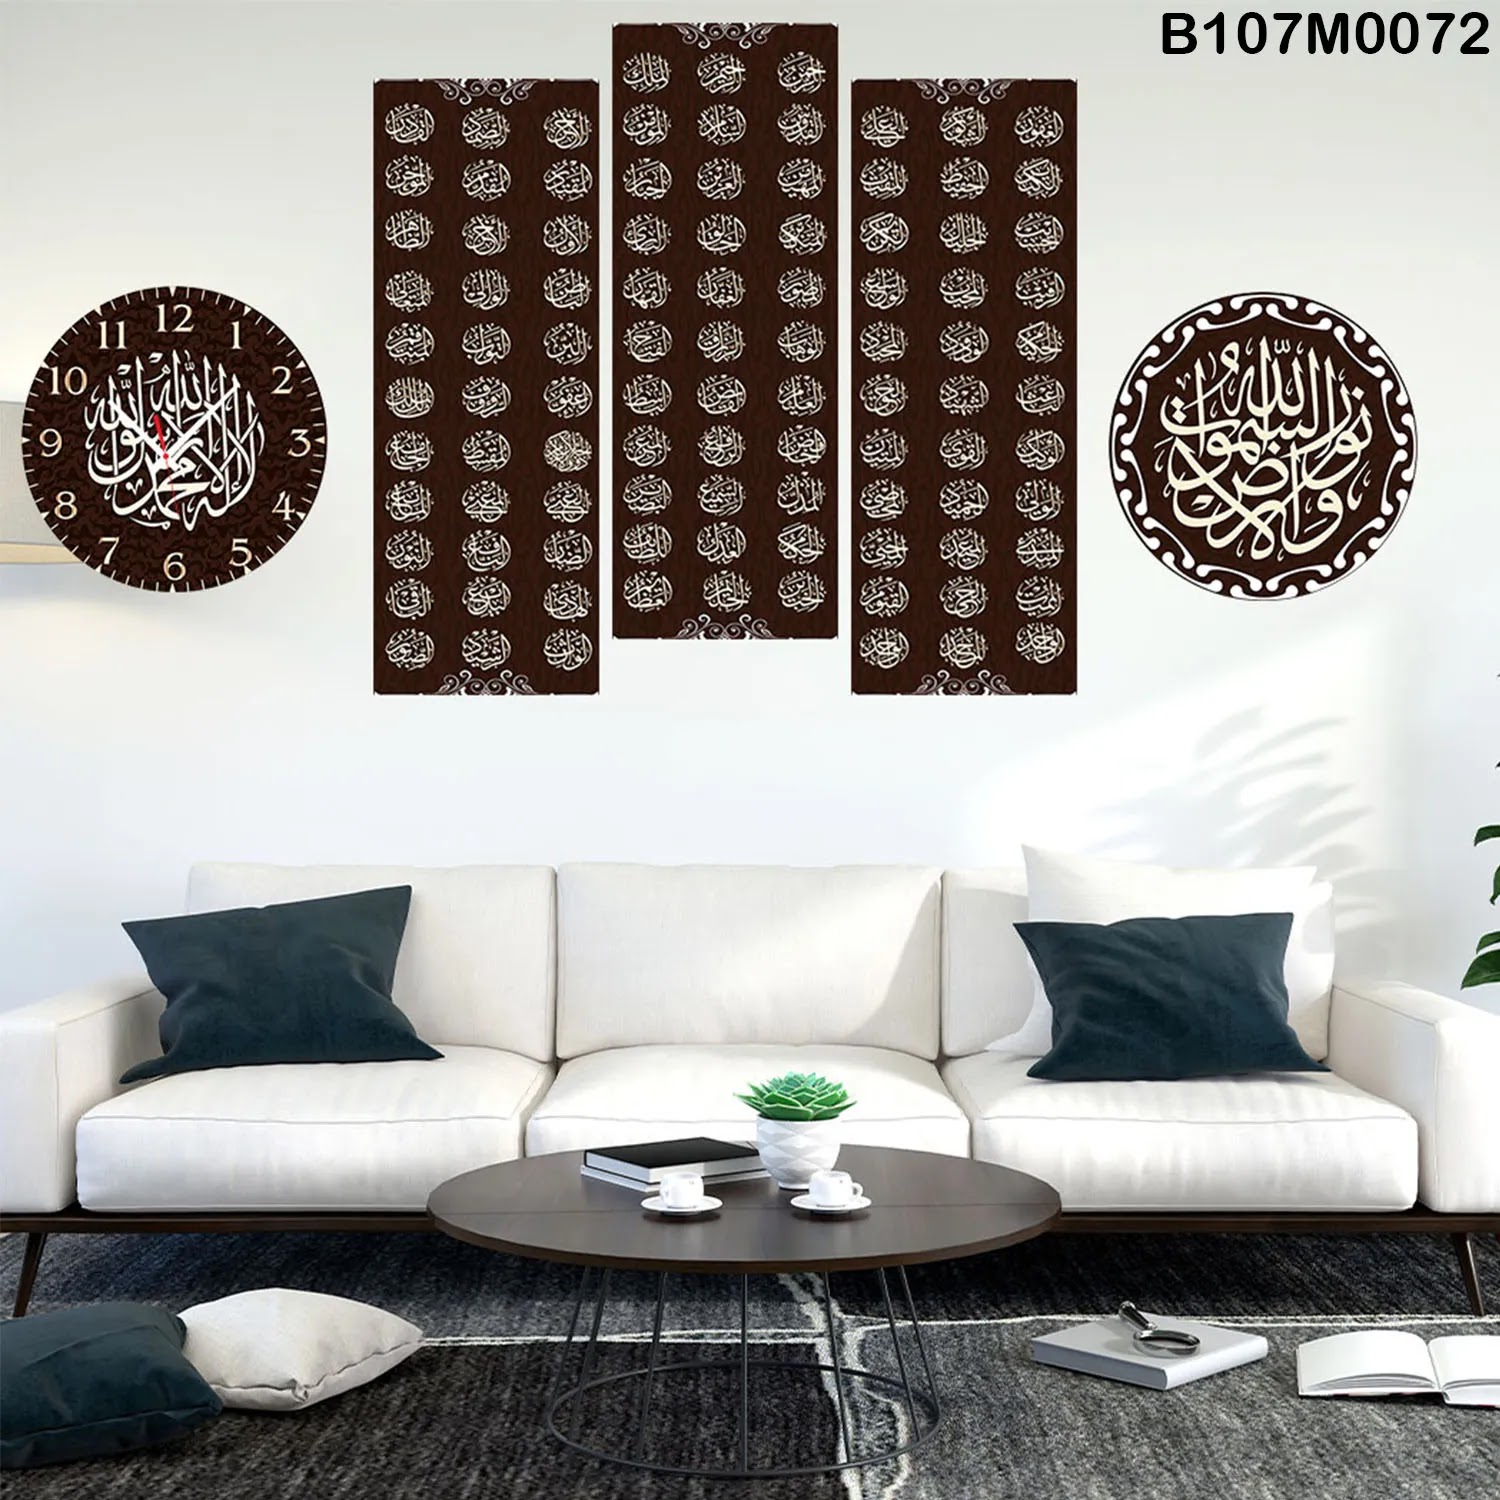 Brown Triptych, clock and a circle with GOD Names & Quran